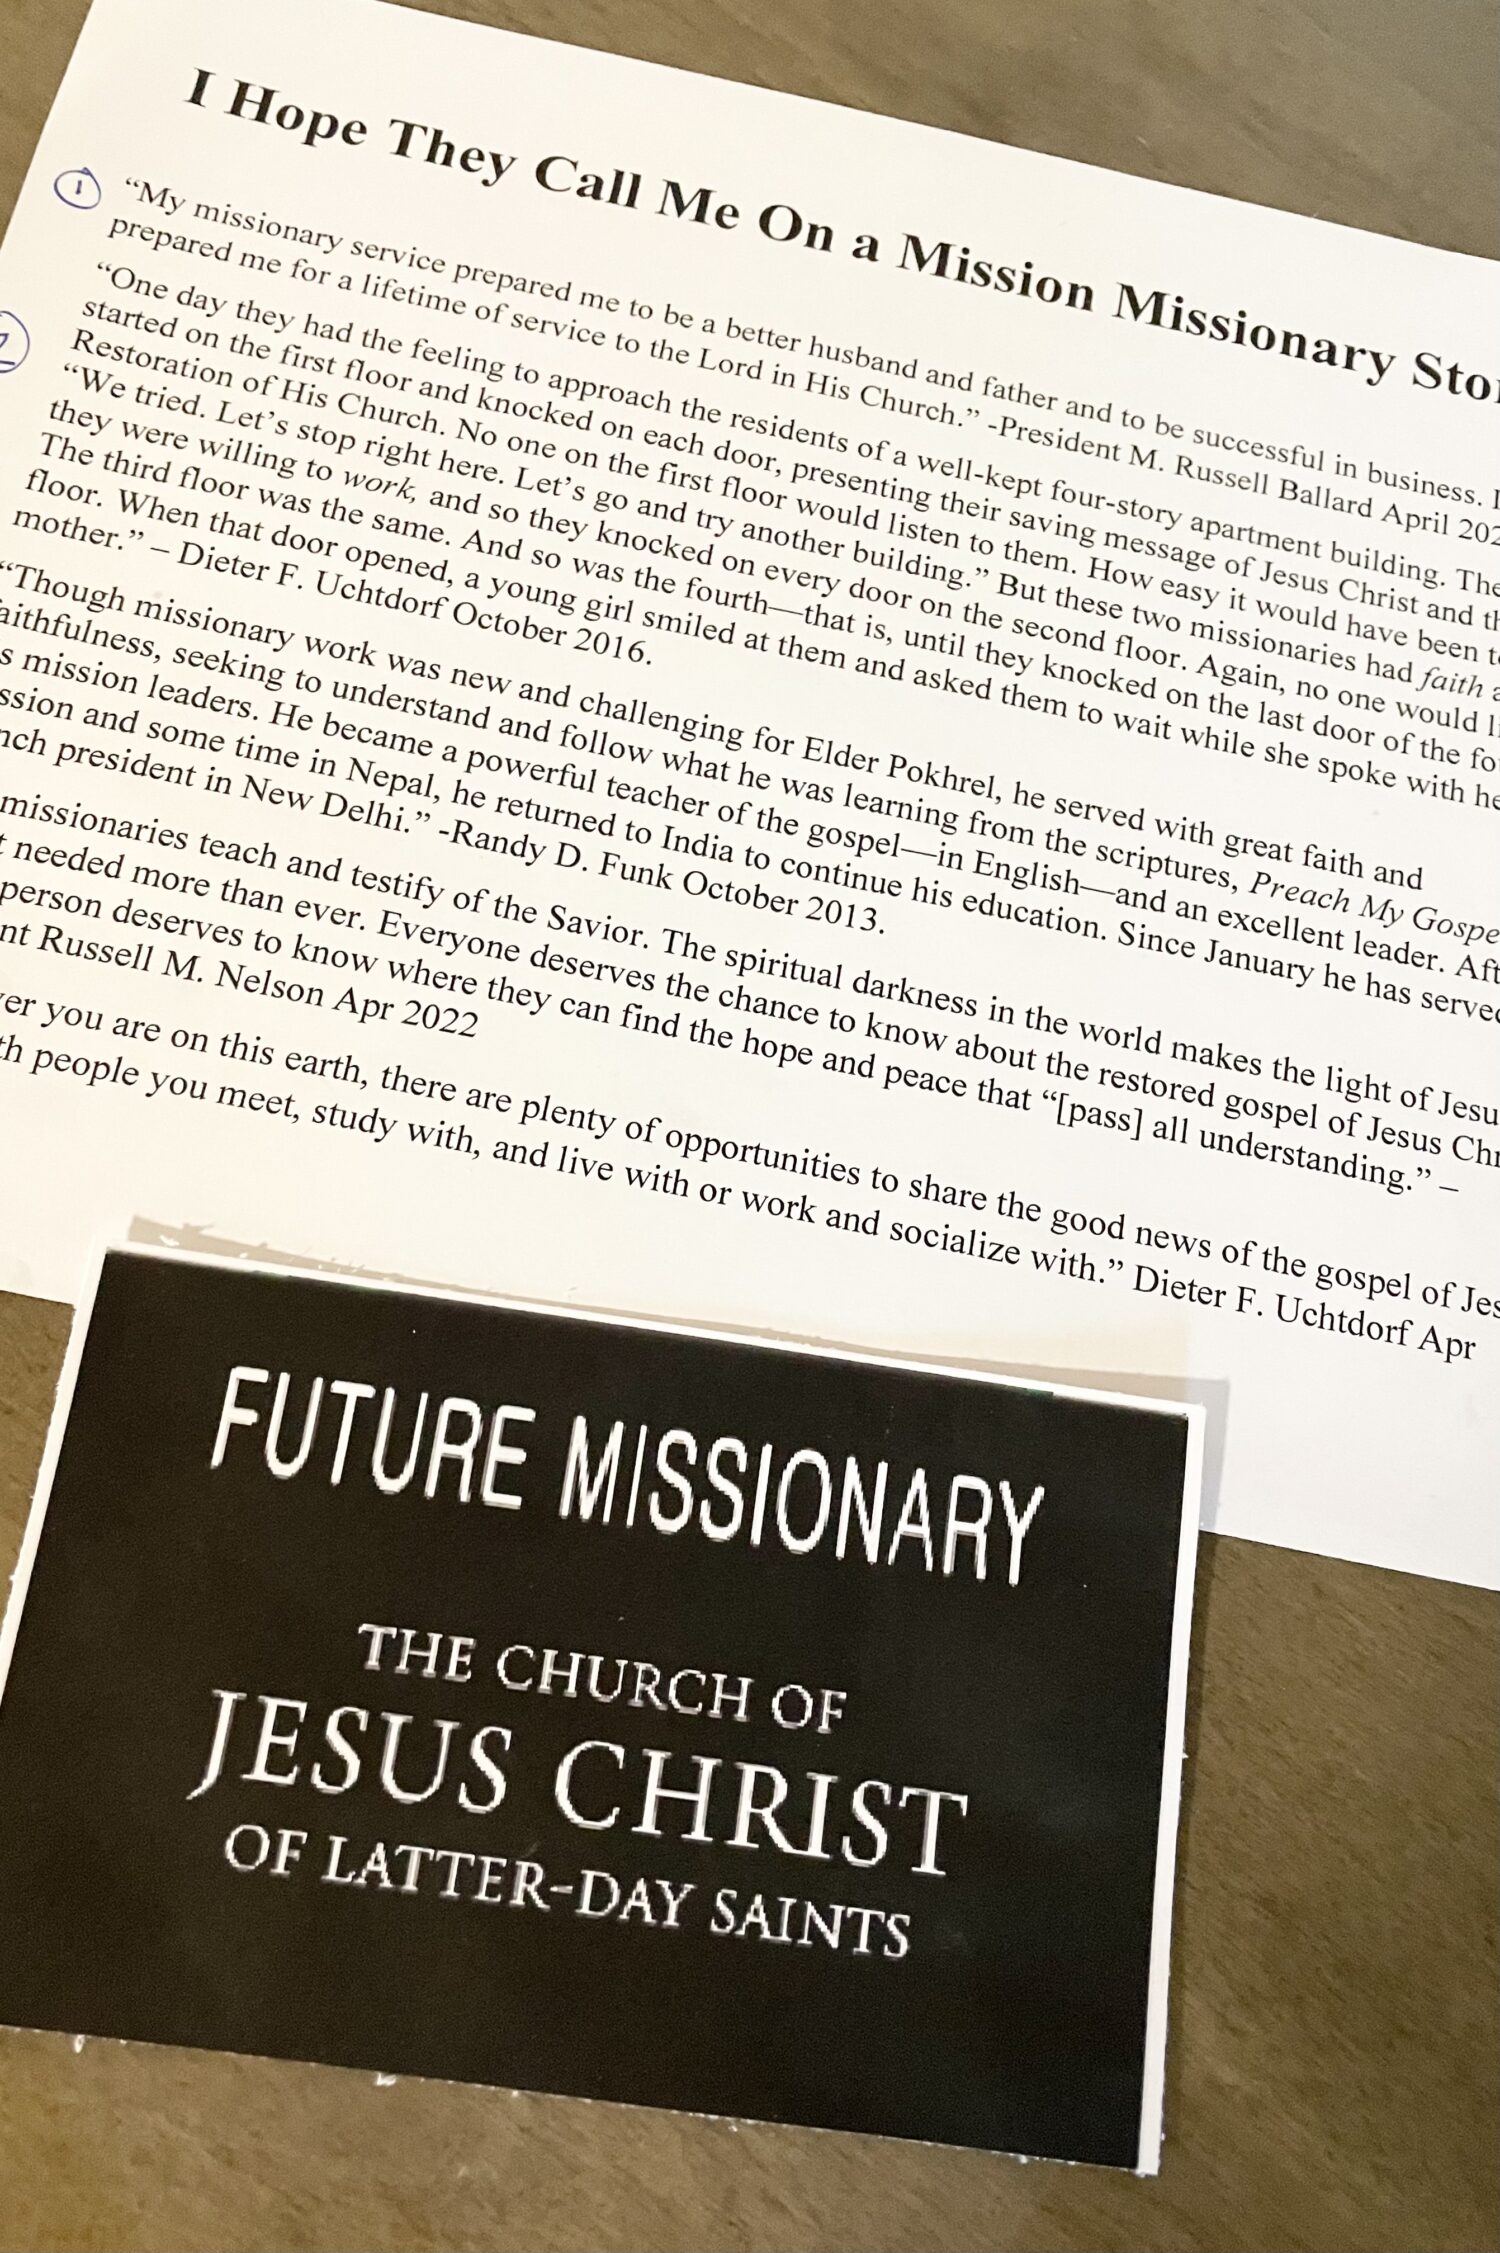 I Hope They Call Me On a Mission Missionary Stories Easy ideas for Music Leaders IMG 7262